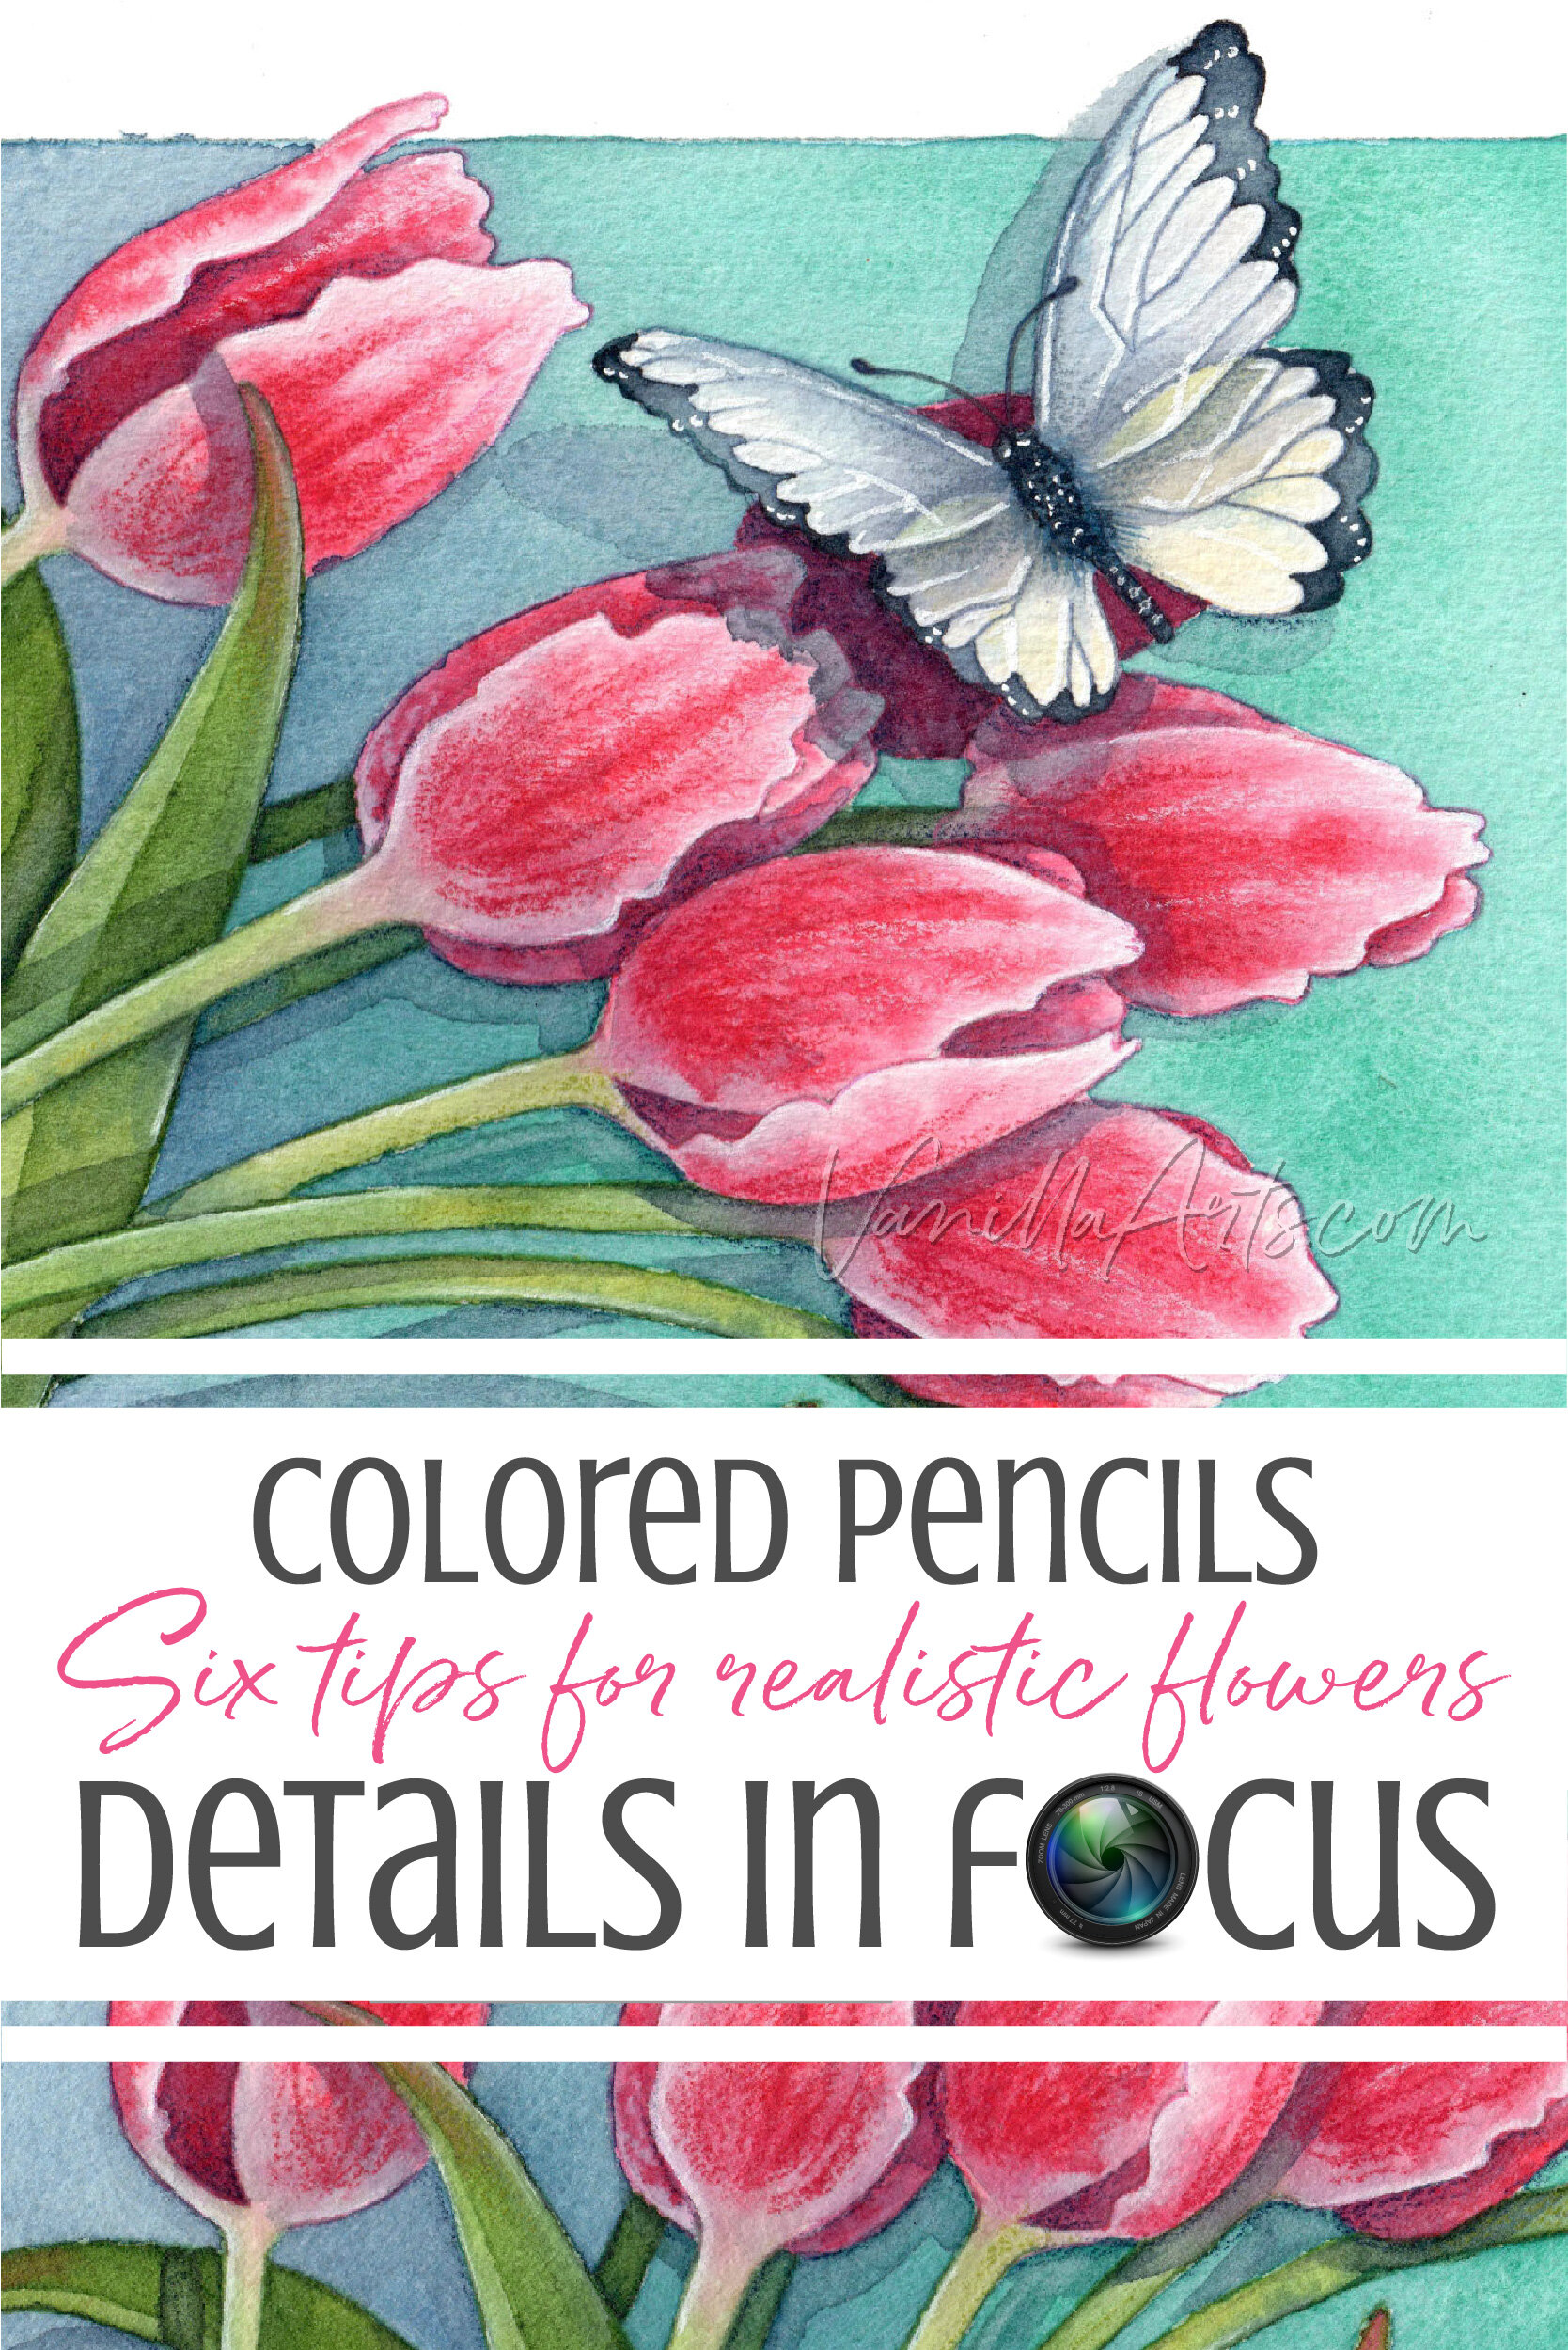 I. Introduction to Coloring for Improving Focus